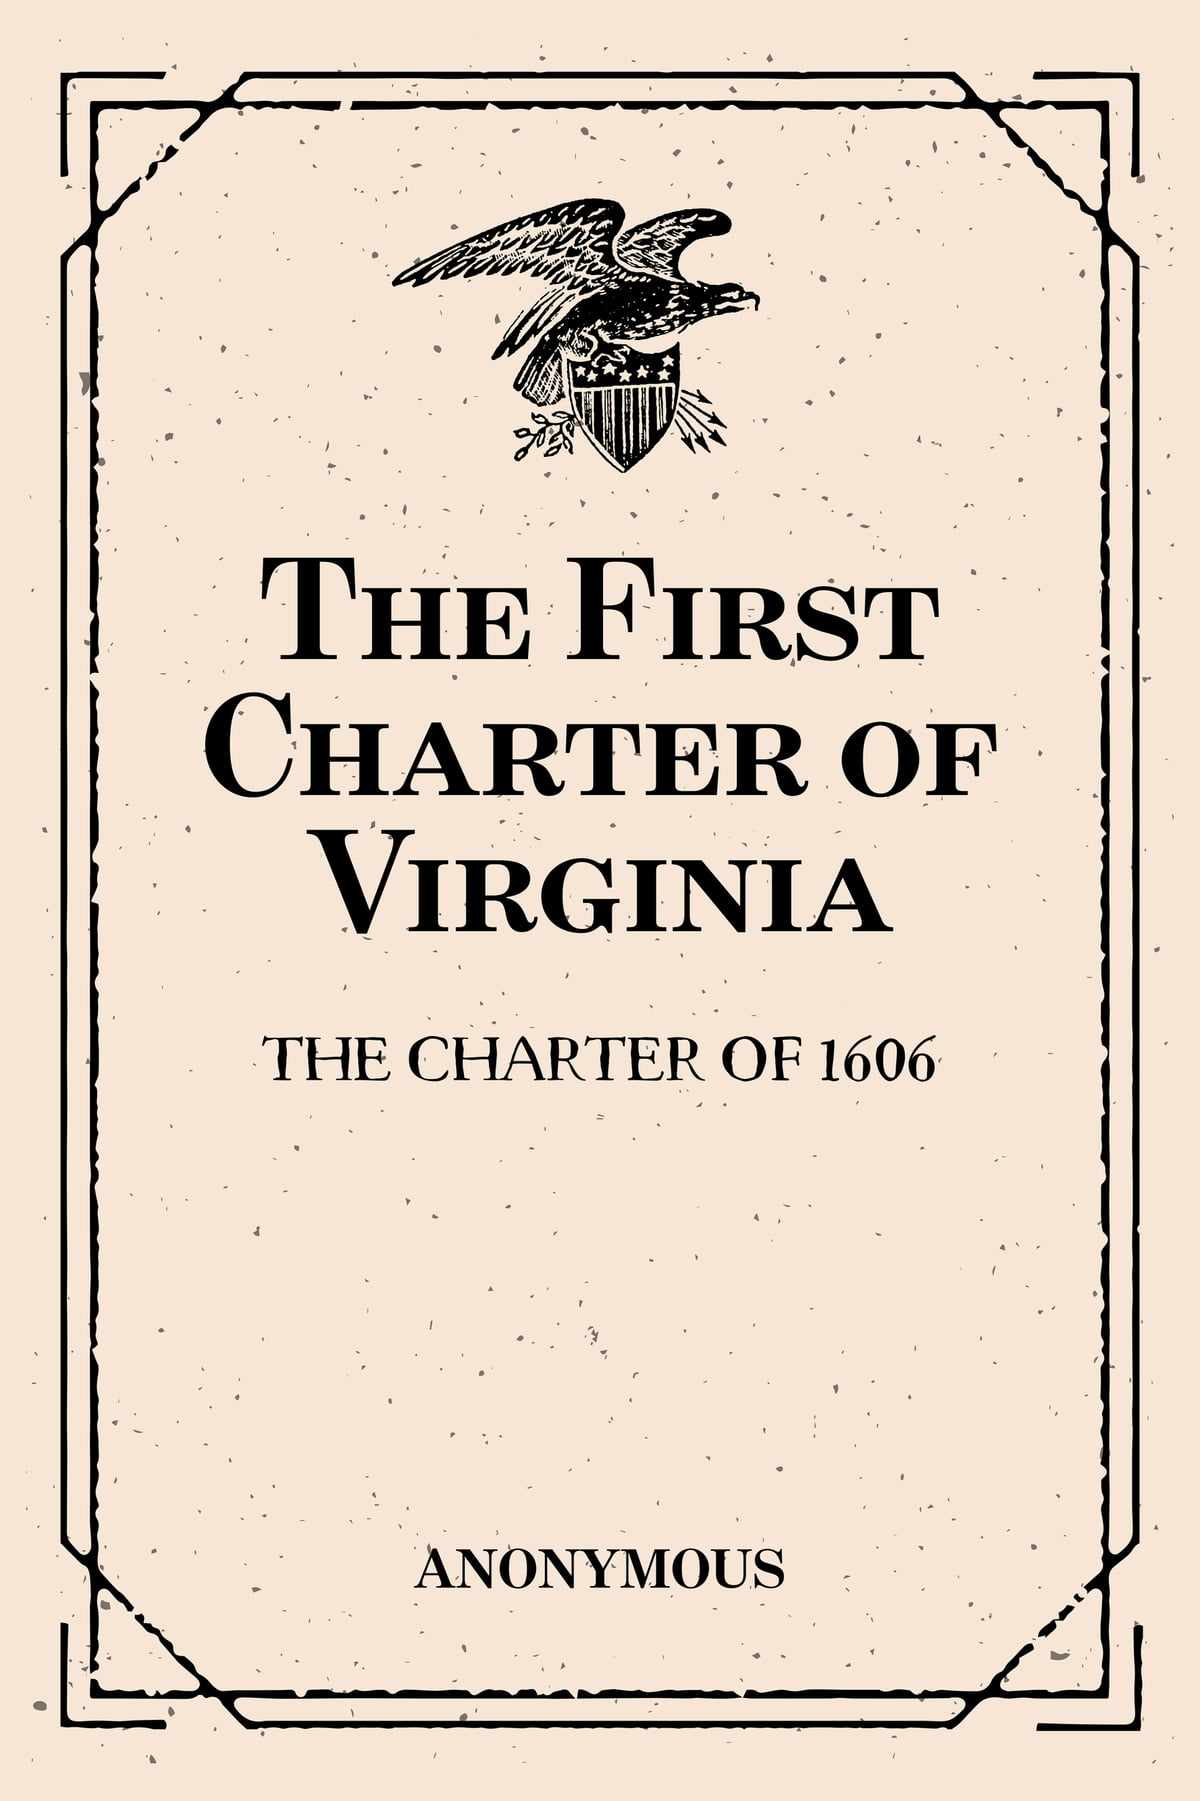 Image of First Charter of Virginia 